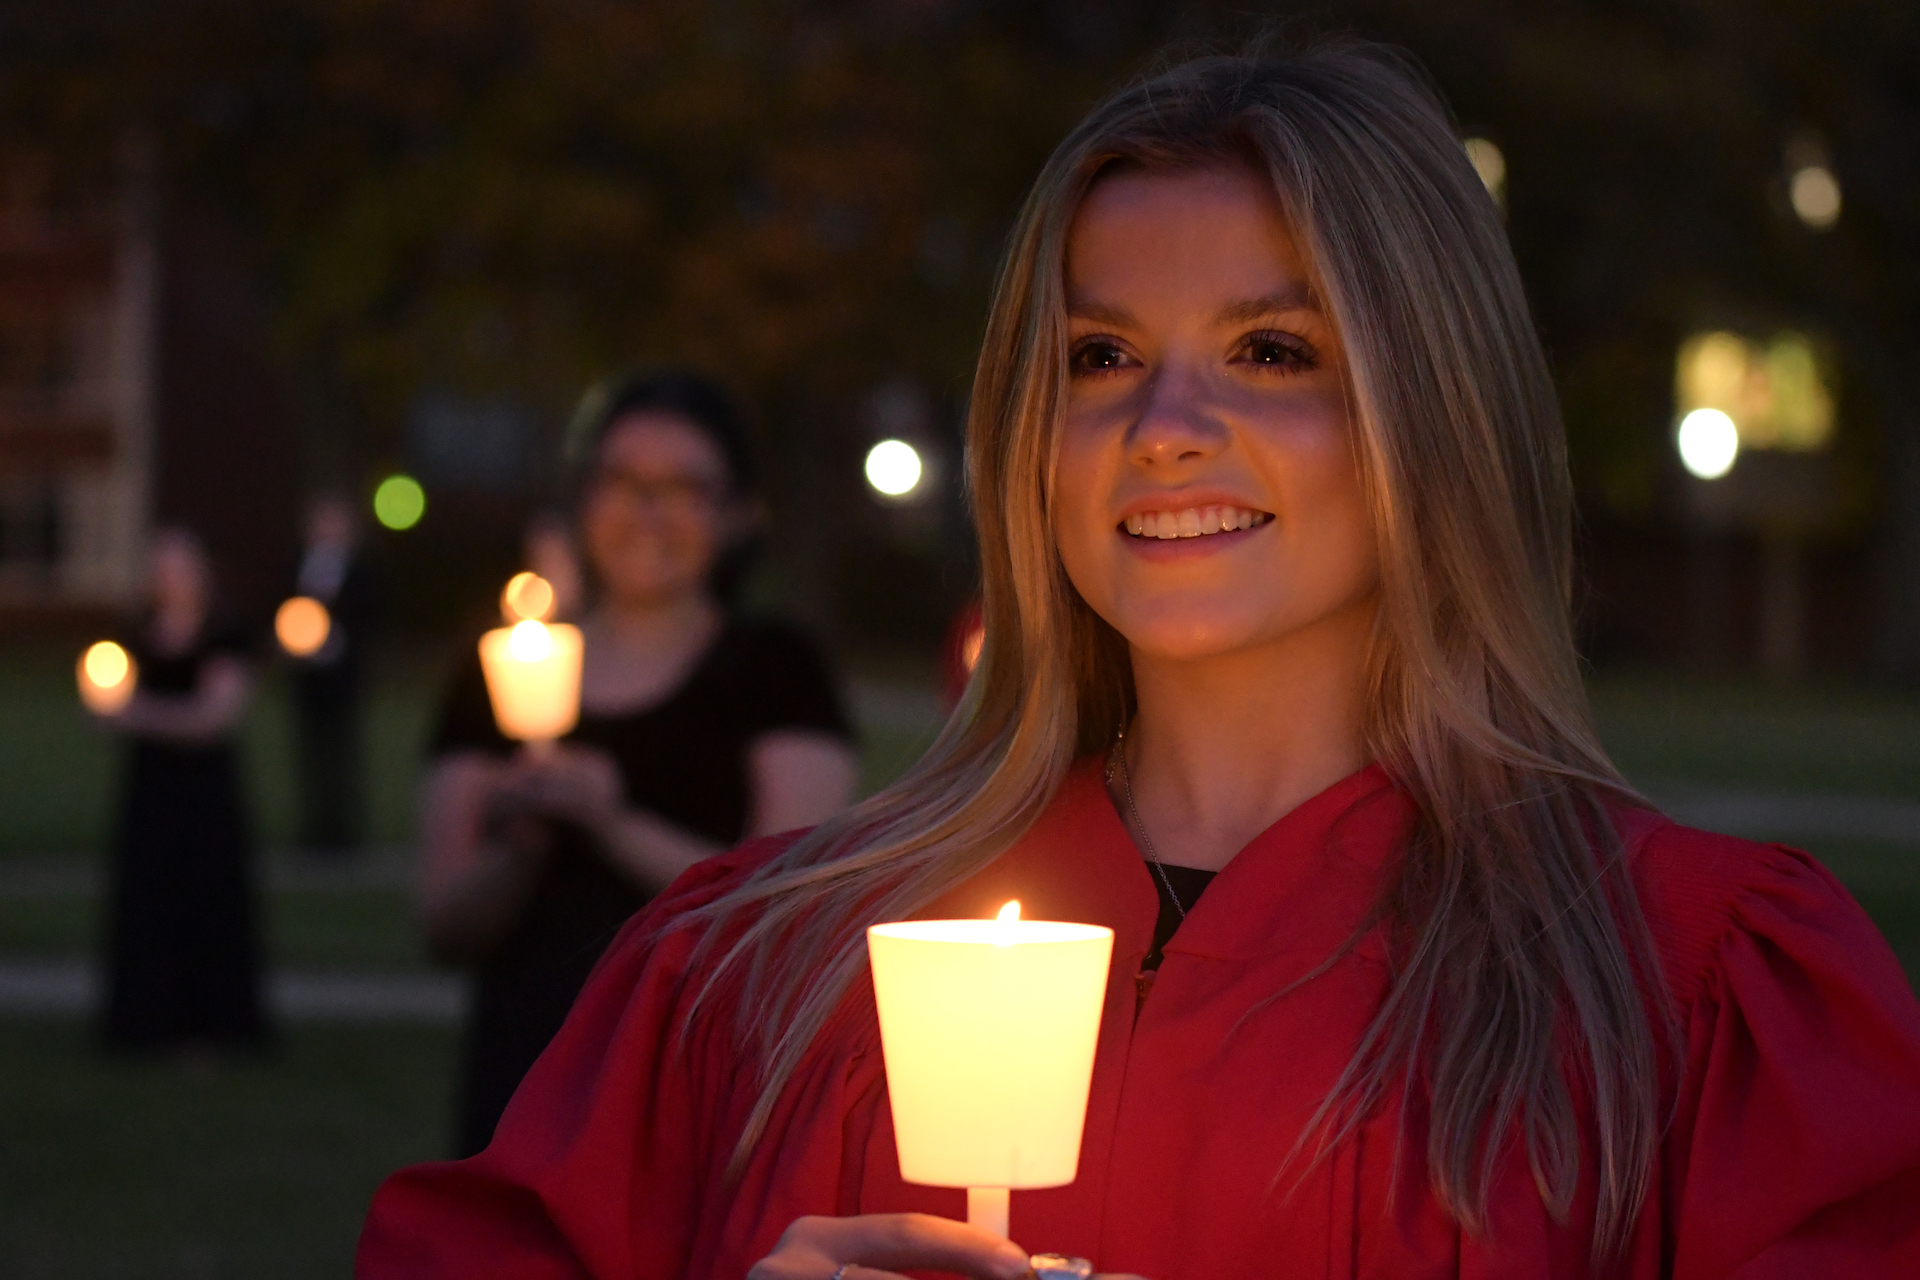 Choir student holding candle.